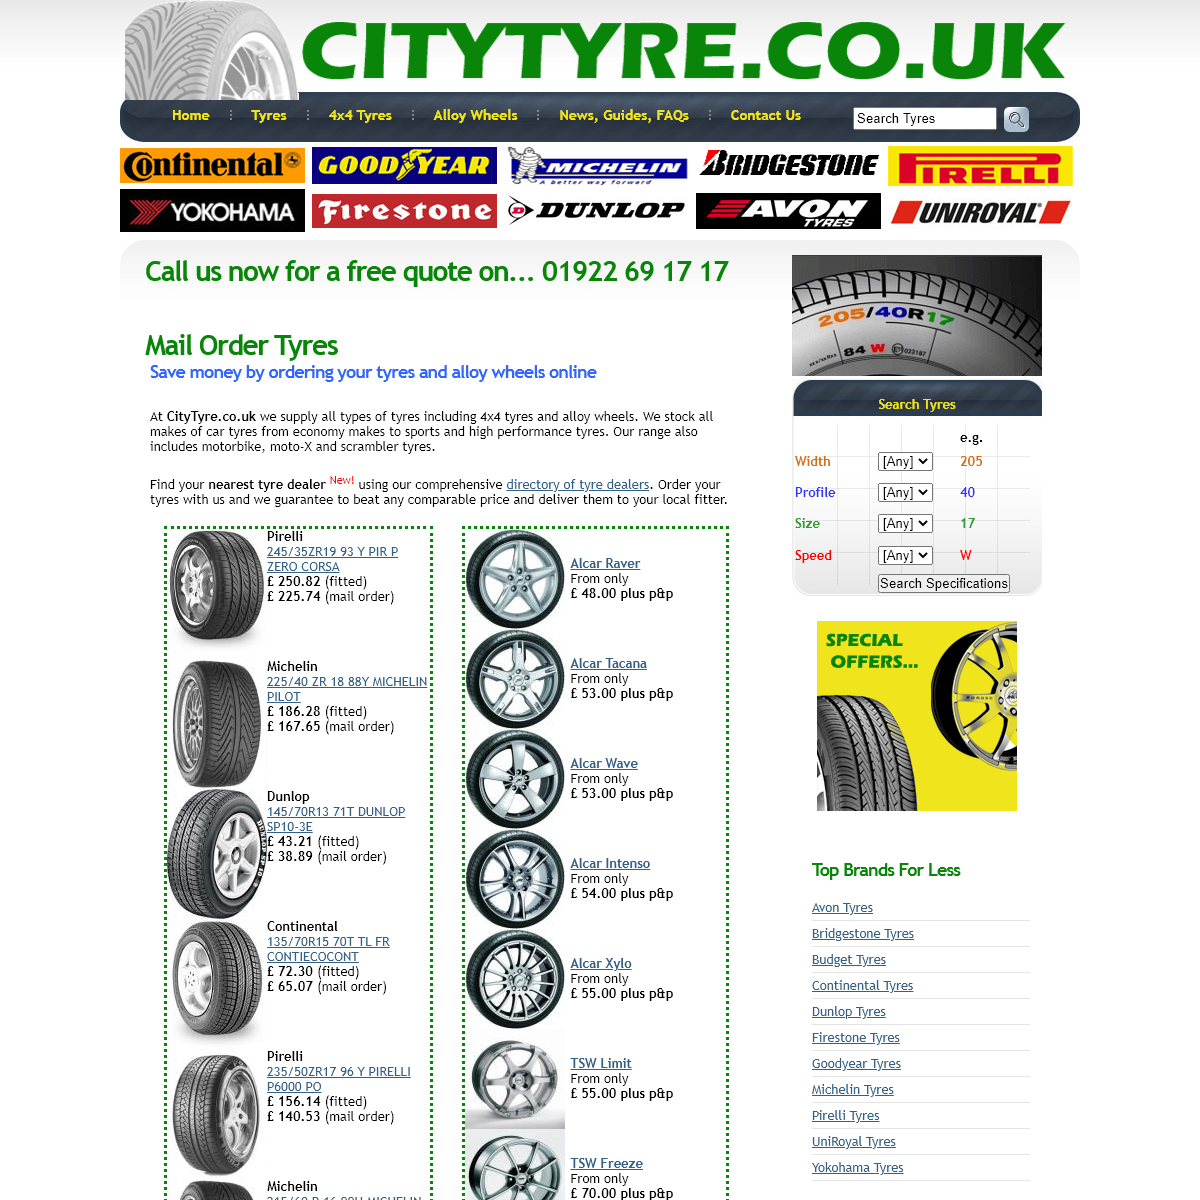 A complete backup of citytyre.co.uk